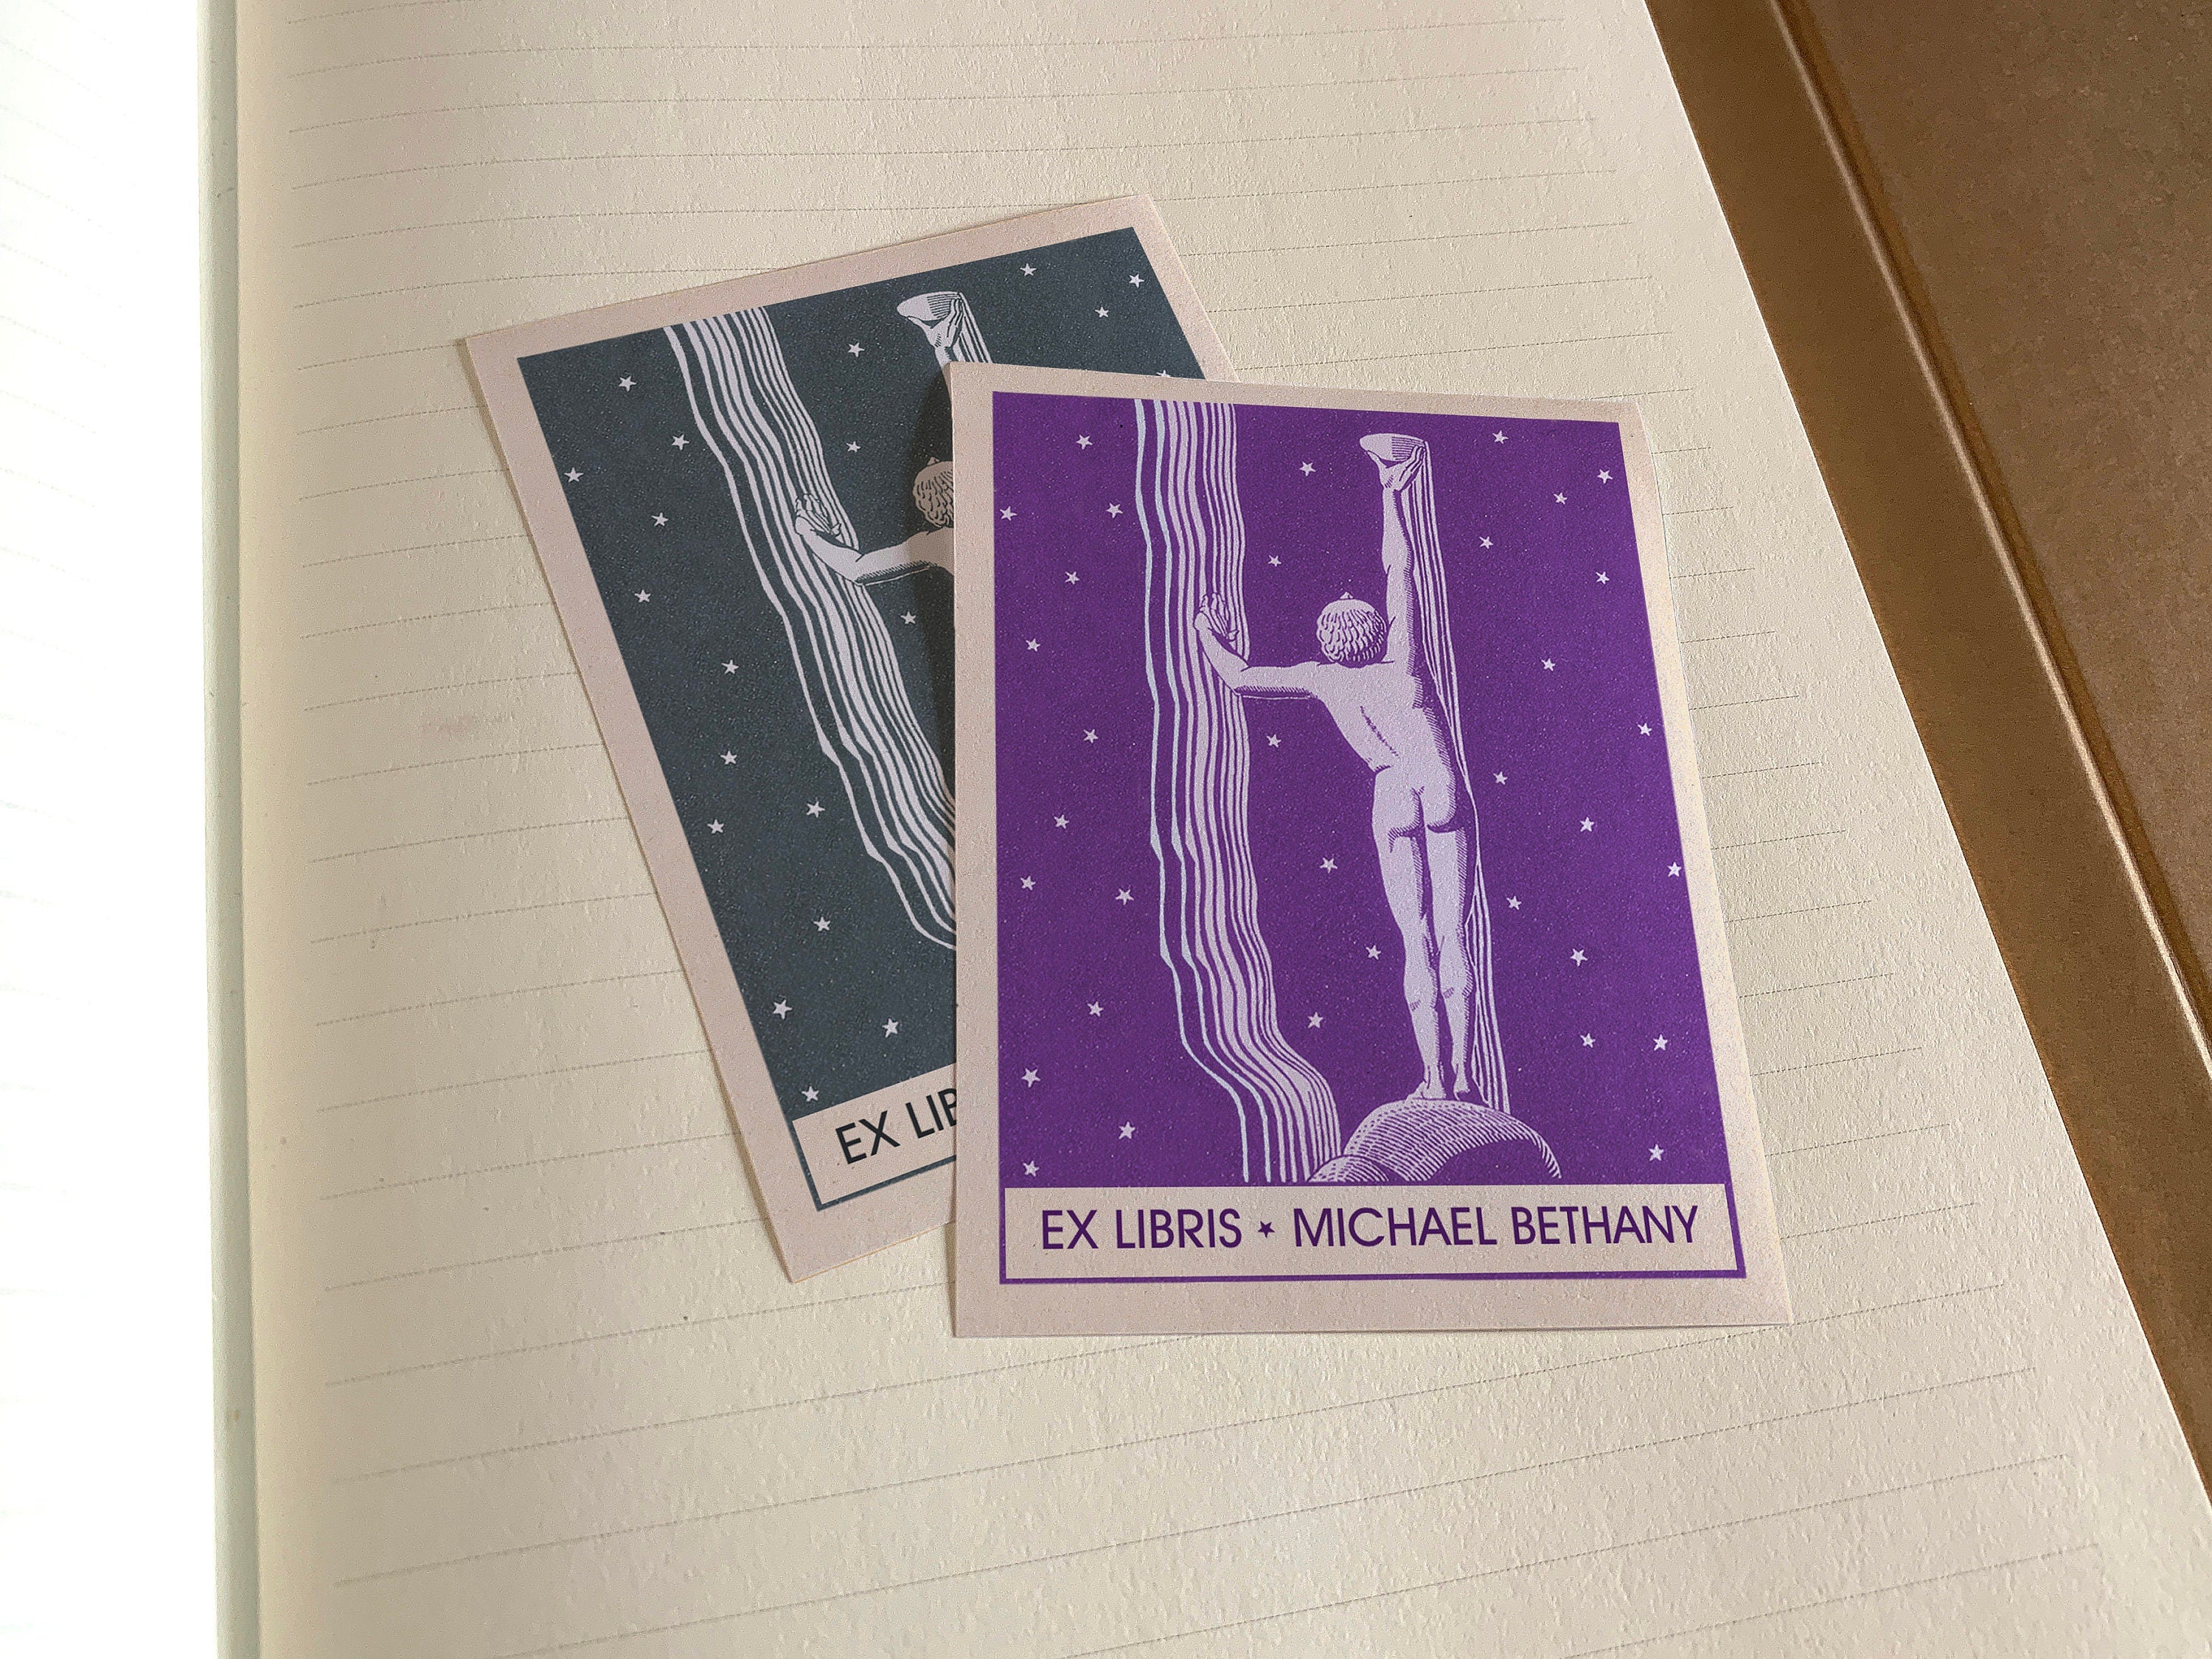 Star Catcher by Rockwell Kent, Personalized Ex-Libris Bookplates, Crafted on Traditional Gummed Paper, 3in x 4in, Set of 30, 3 Colors